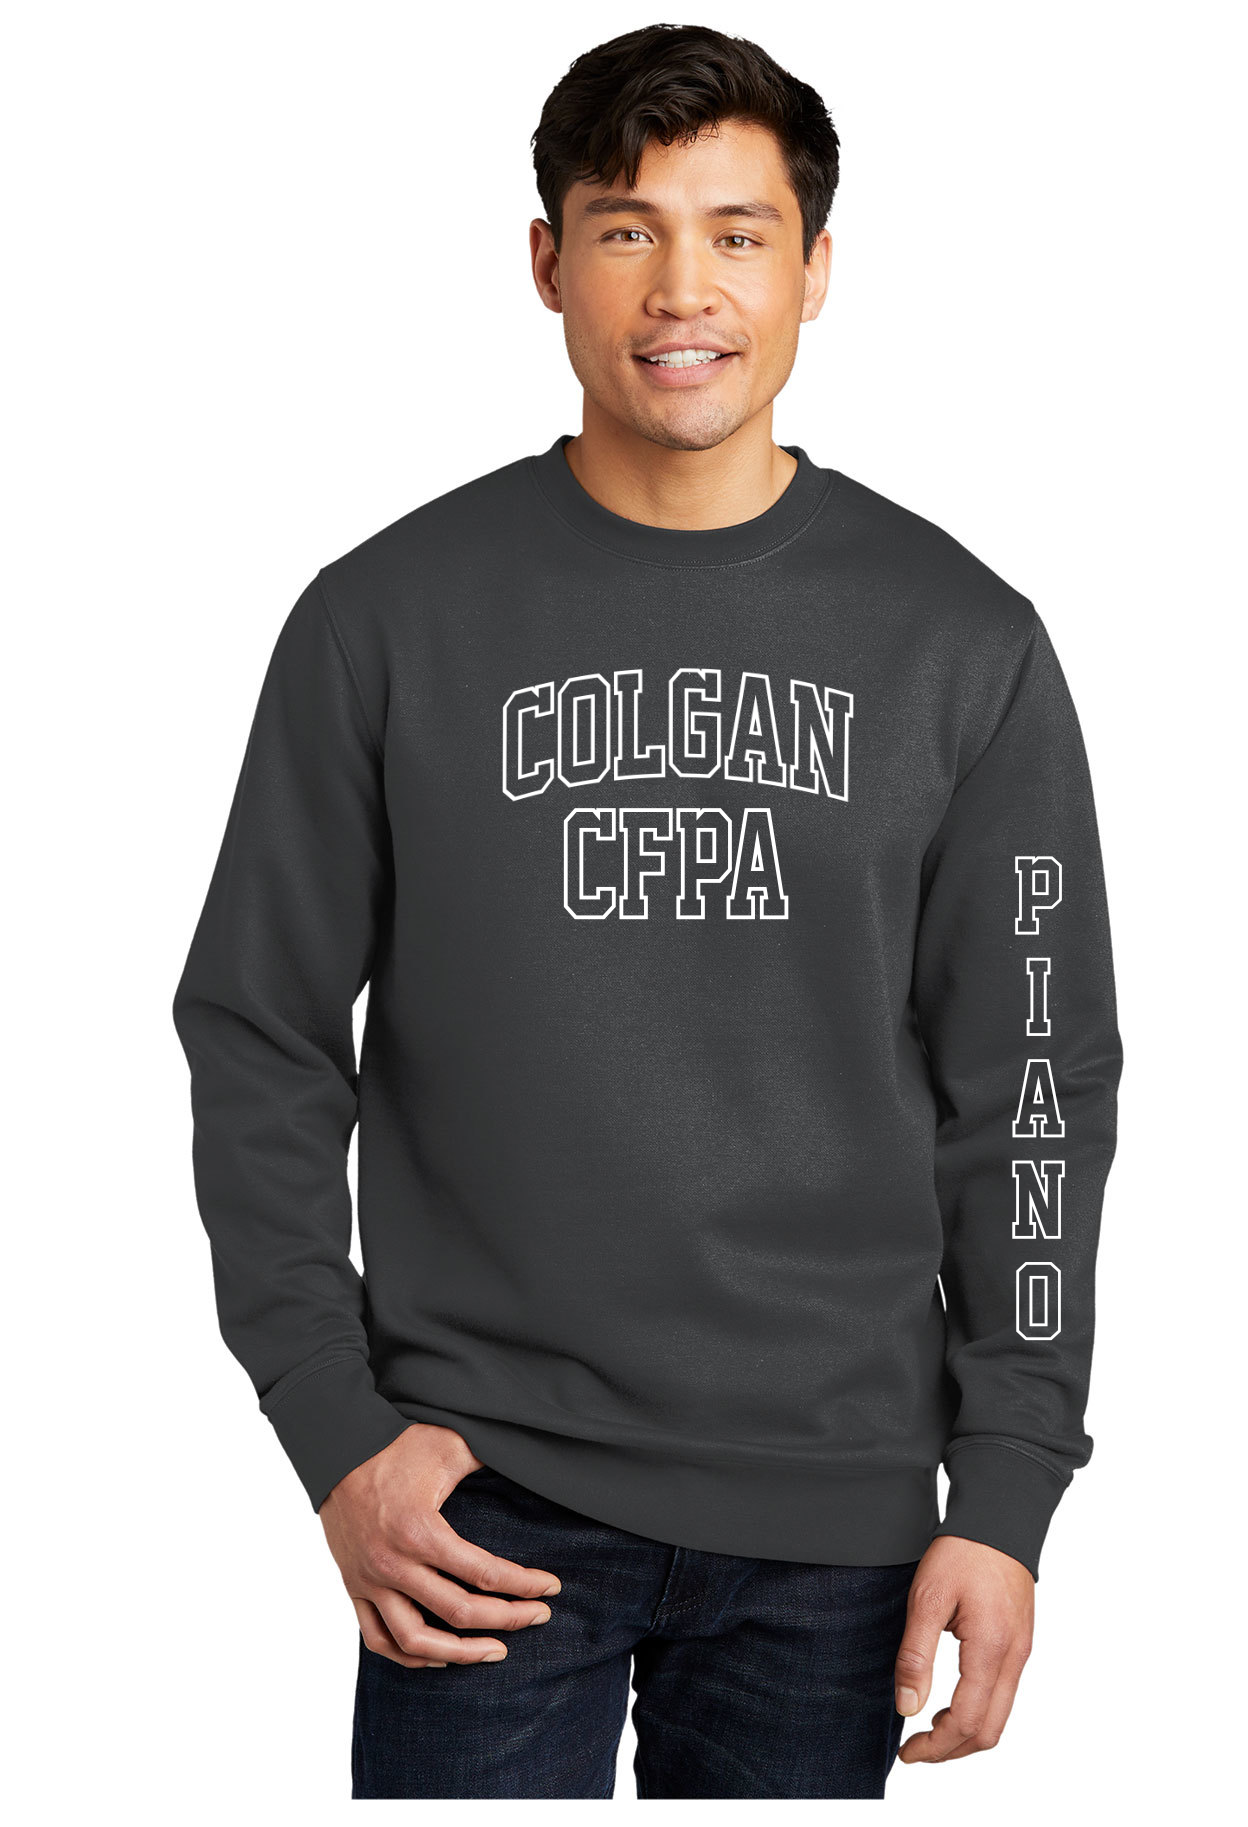 Collegiate Sweatshirt with Concentration